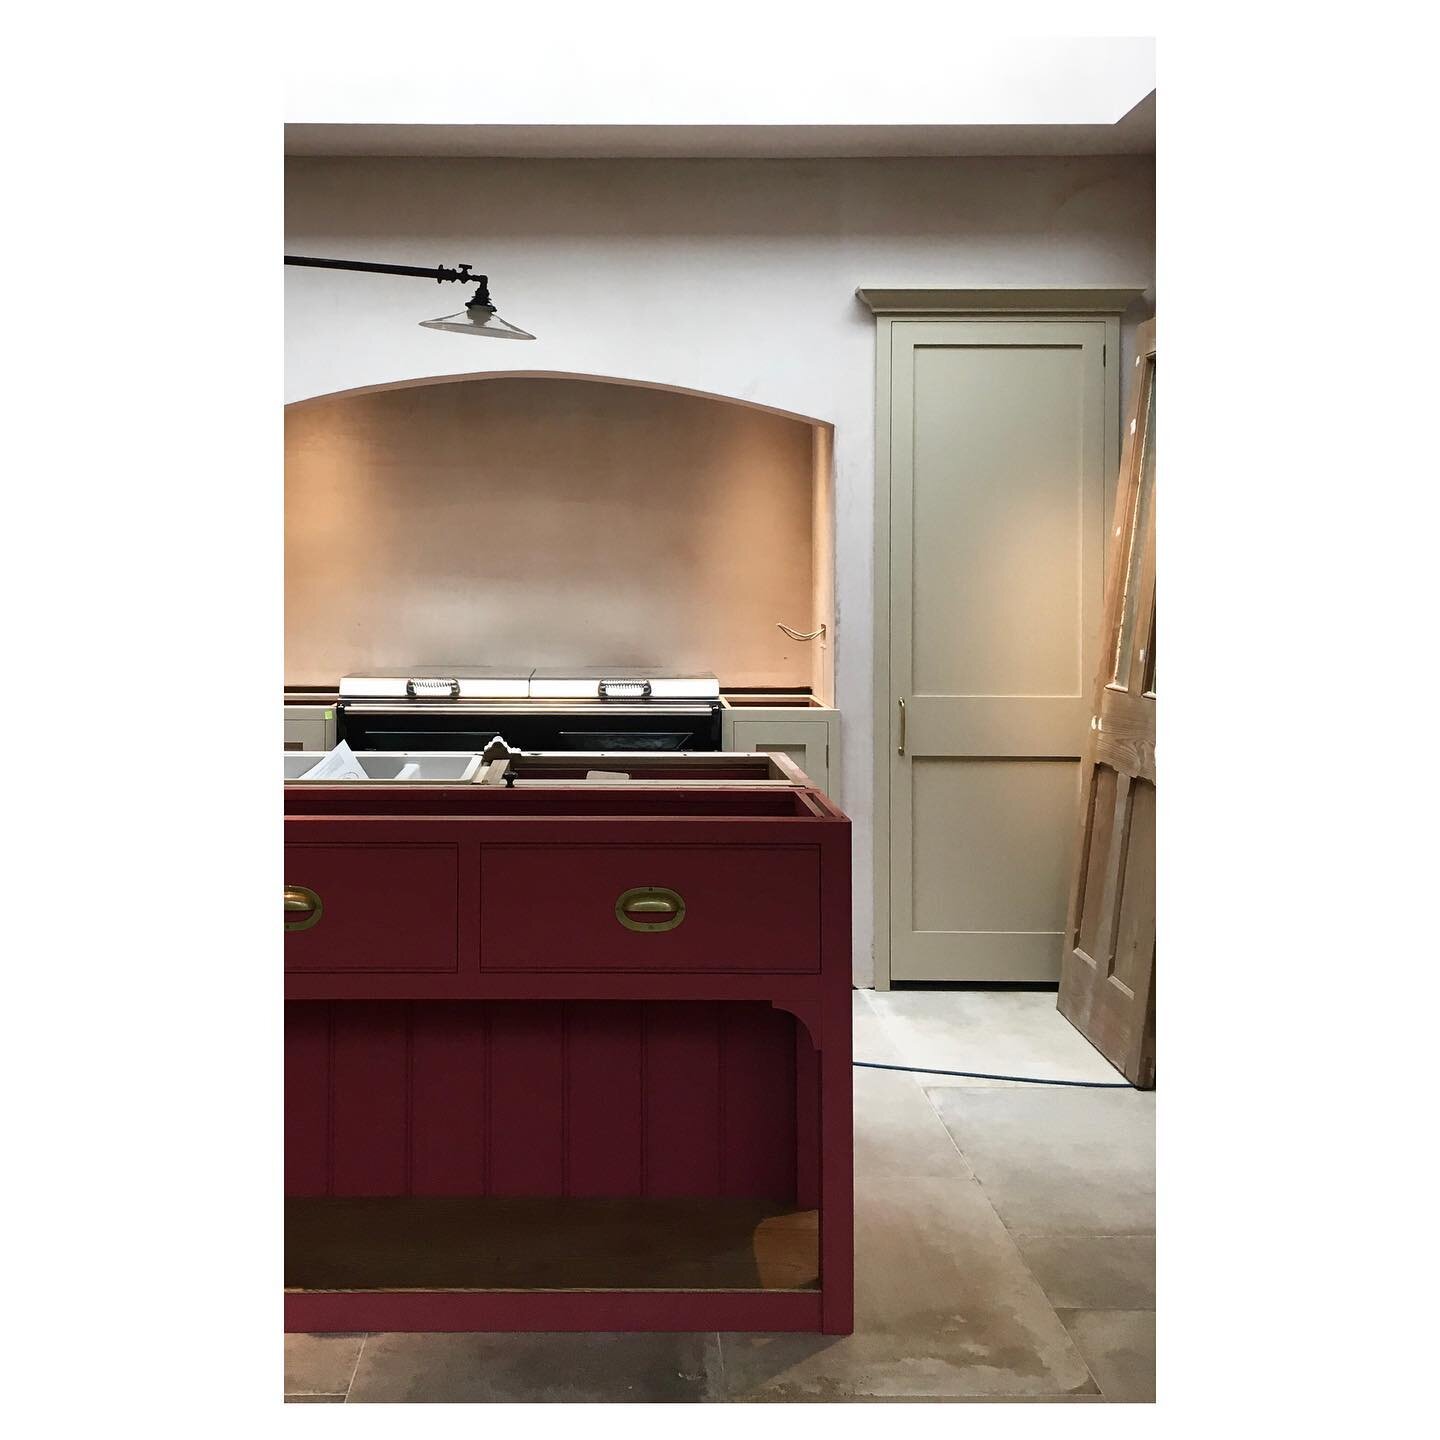 All styling by me: no worktops, extension lead cable, some old pine doors and light at a jaunty angle!
.
.
.
.
#interiorstyling #bespokekitchen